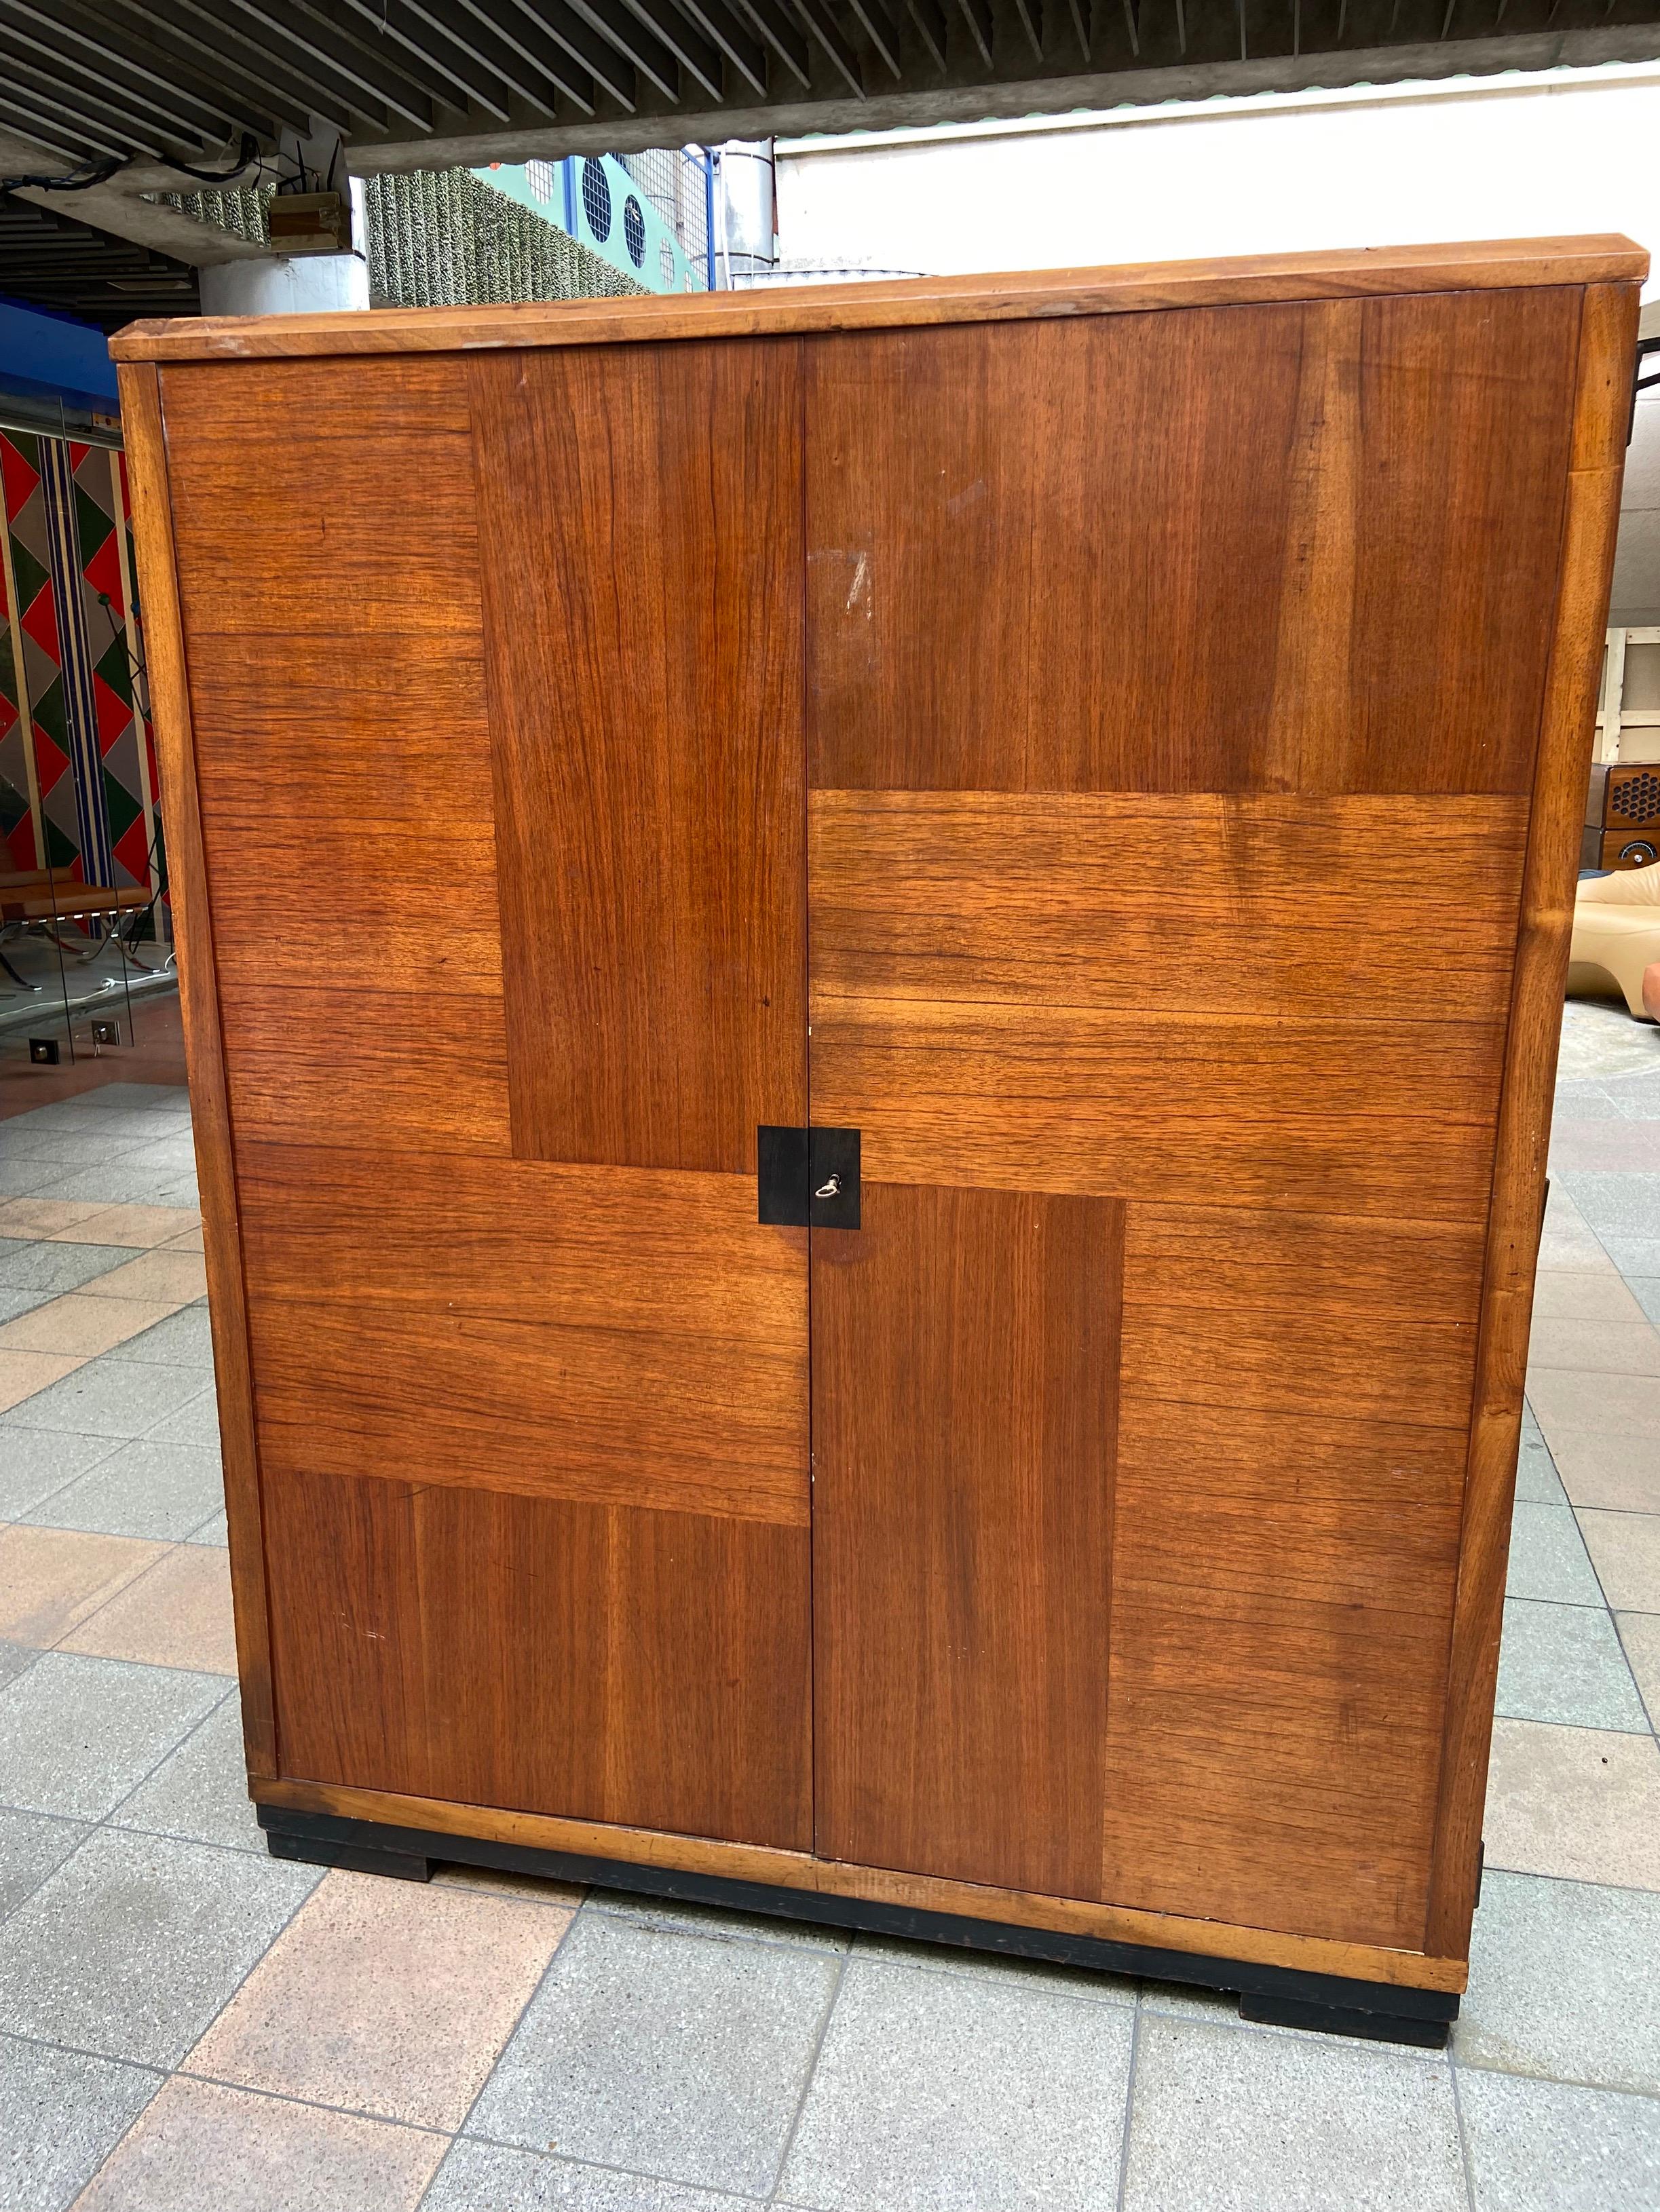 Wardrobe - Le Corbusier - 1930

For the home Innovation

Mahogany

Opening on 2 doors and ingenious storage system
restored at the level of the exterior oak veneer

Measures: 164 x 129 x 58.5 cm.

